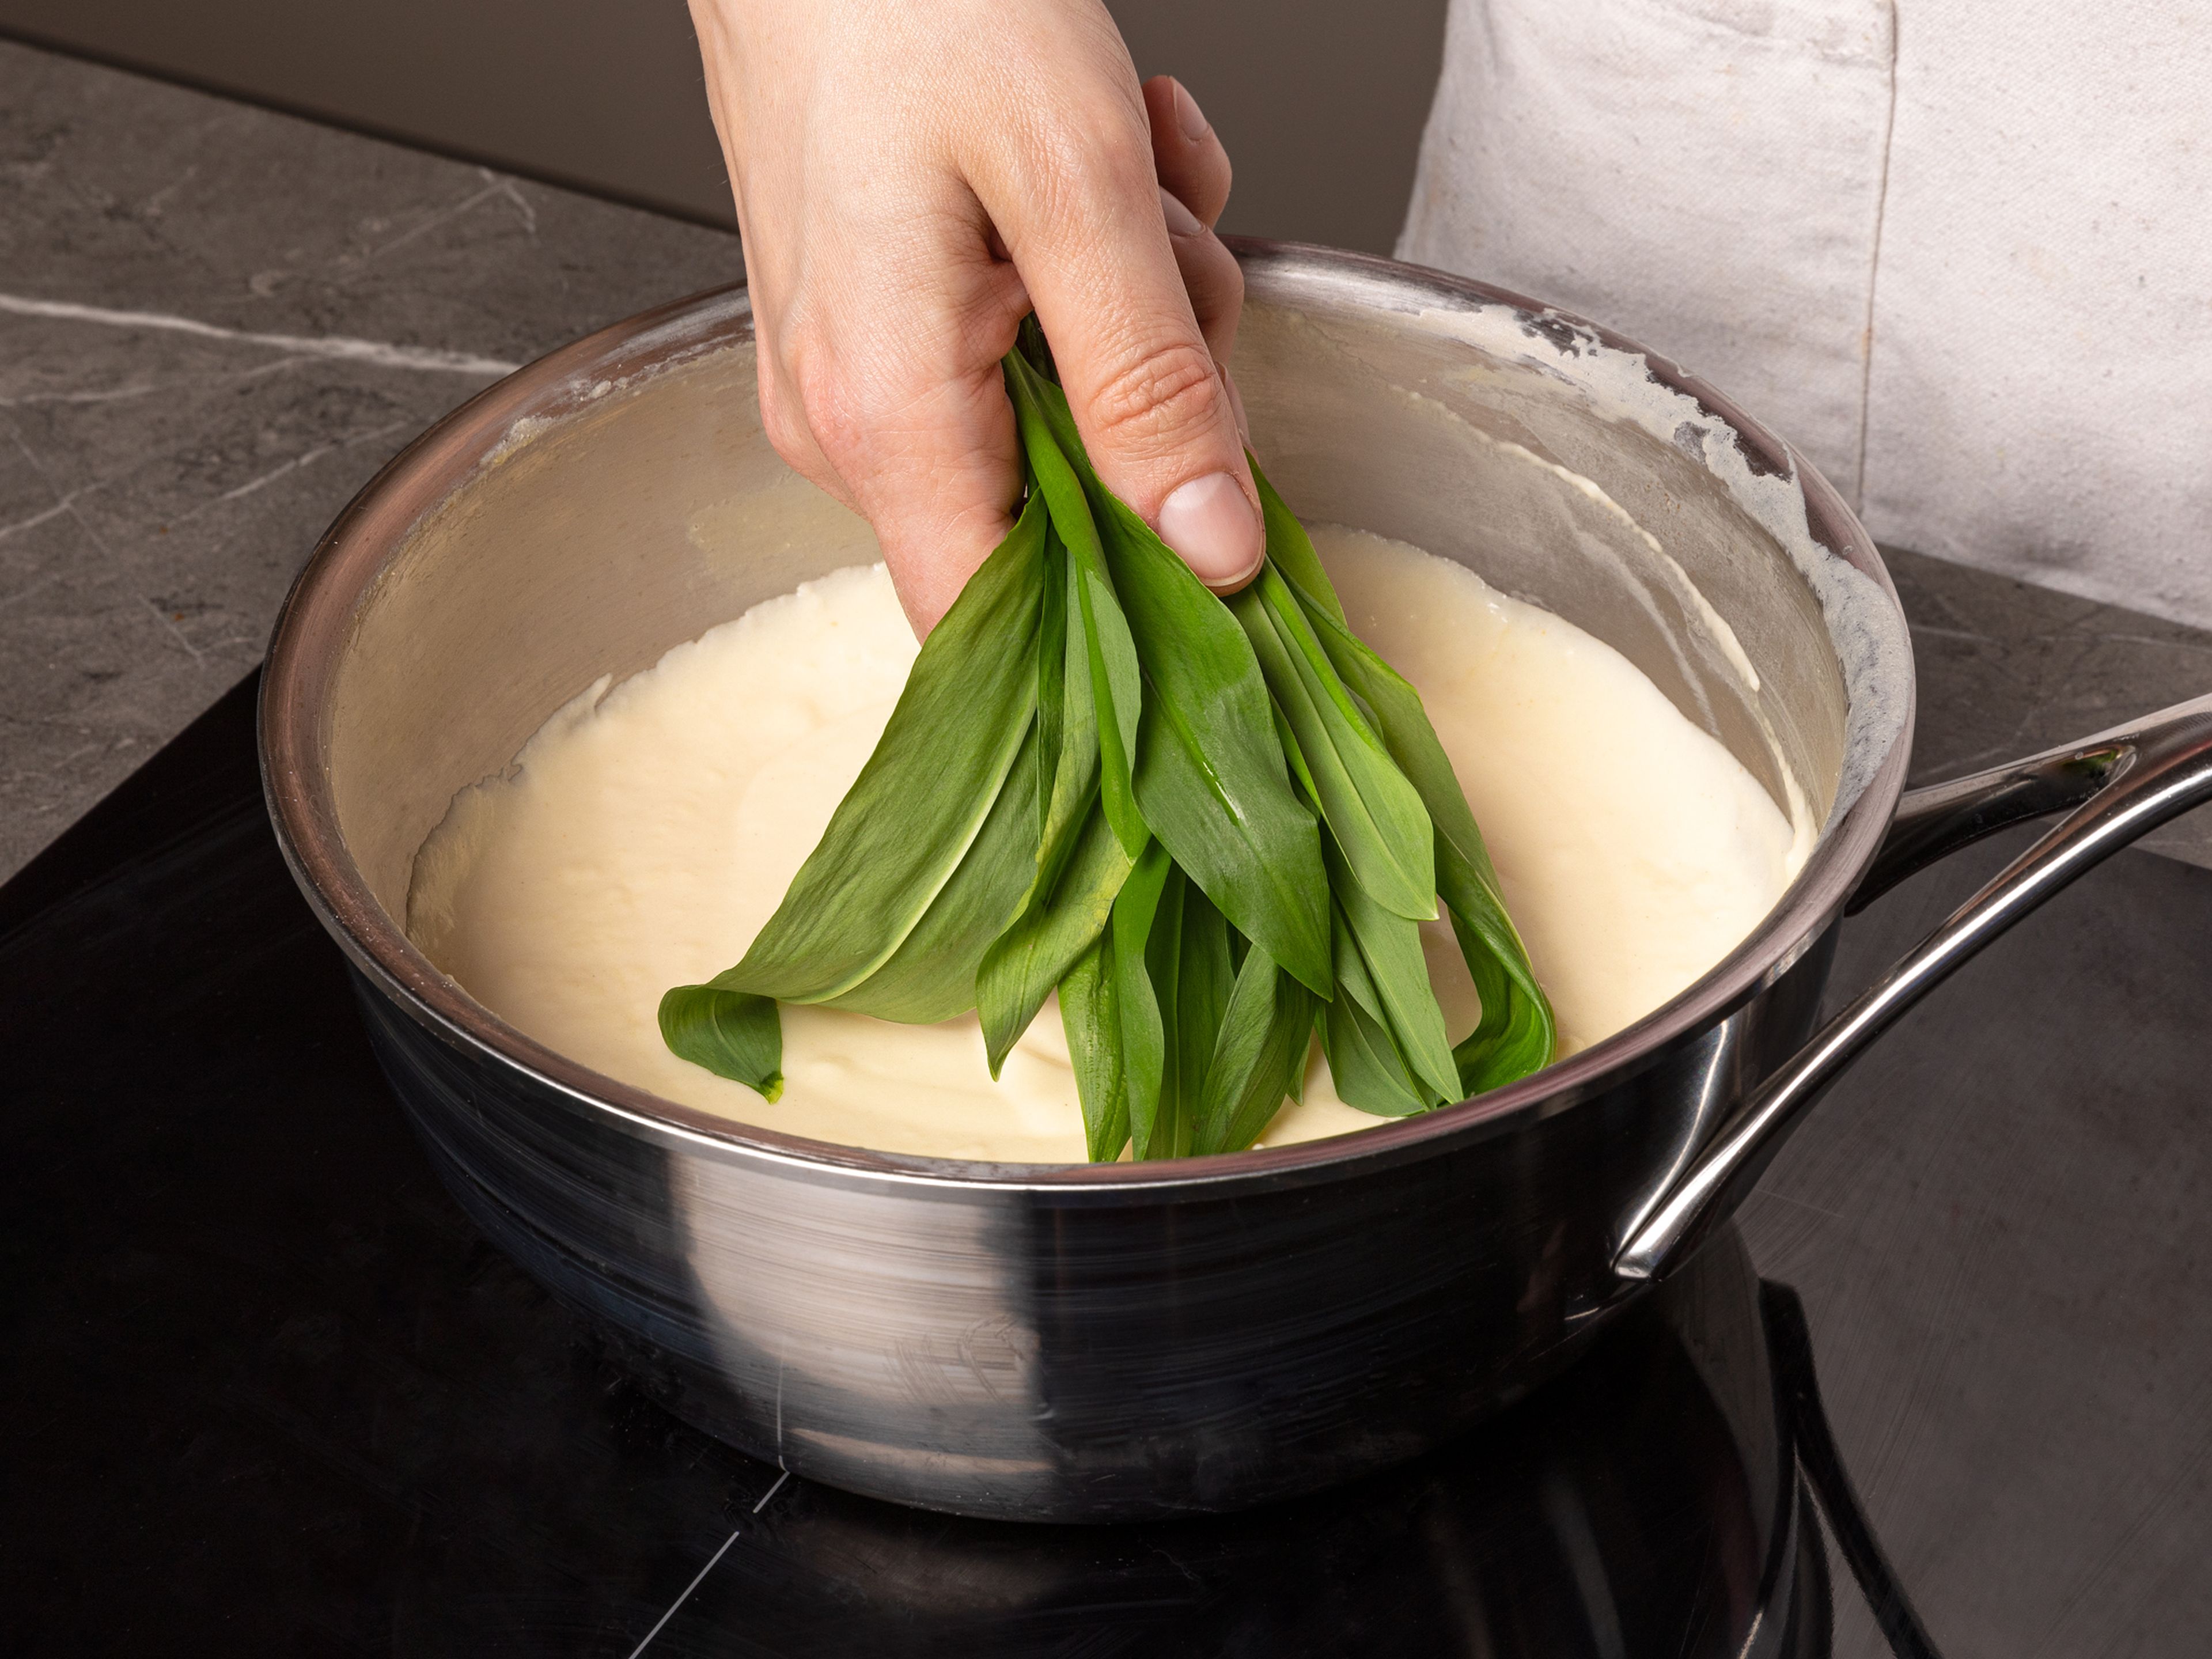 Melt butter in a pot, add flour, and fry for approx. 1–2 min while stirring. Stir in milk and evaporated milk. Bring to a boil over high heat, simmering for approx. 1 min. while stirring. Reduce heat, add Dijon mustard and vinegar, and season with salt. Add wild garlic, spinach, and ¾ of the cheese to the sauce, mix briefly until spinach and wild garlic wilt, then remove from heat. Use an immersion blender to blend the sauce until smooth. Season to taste with salt and pepper.